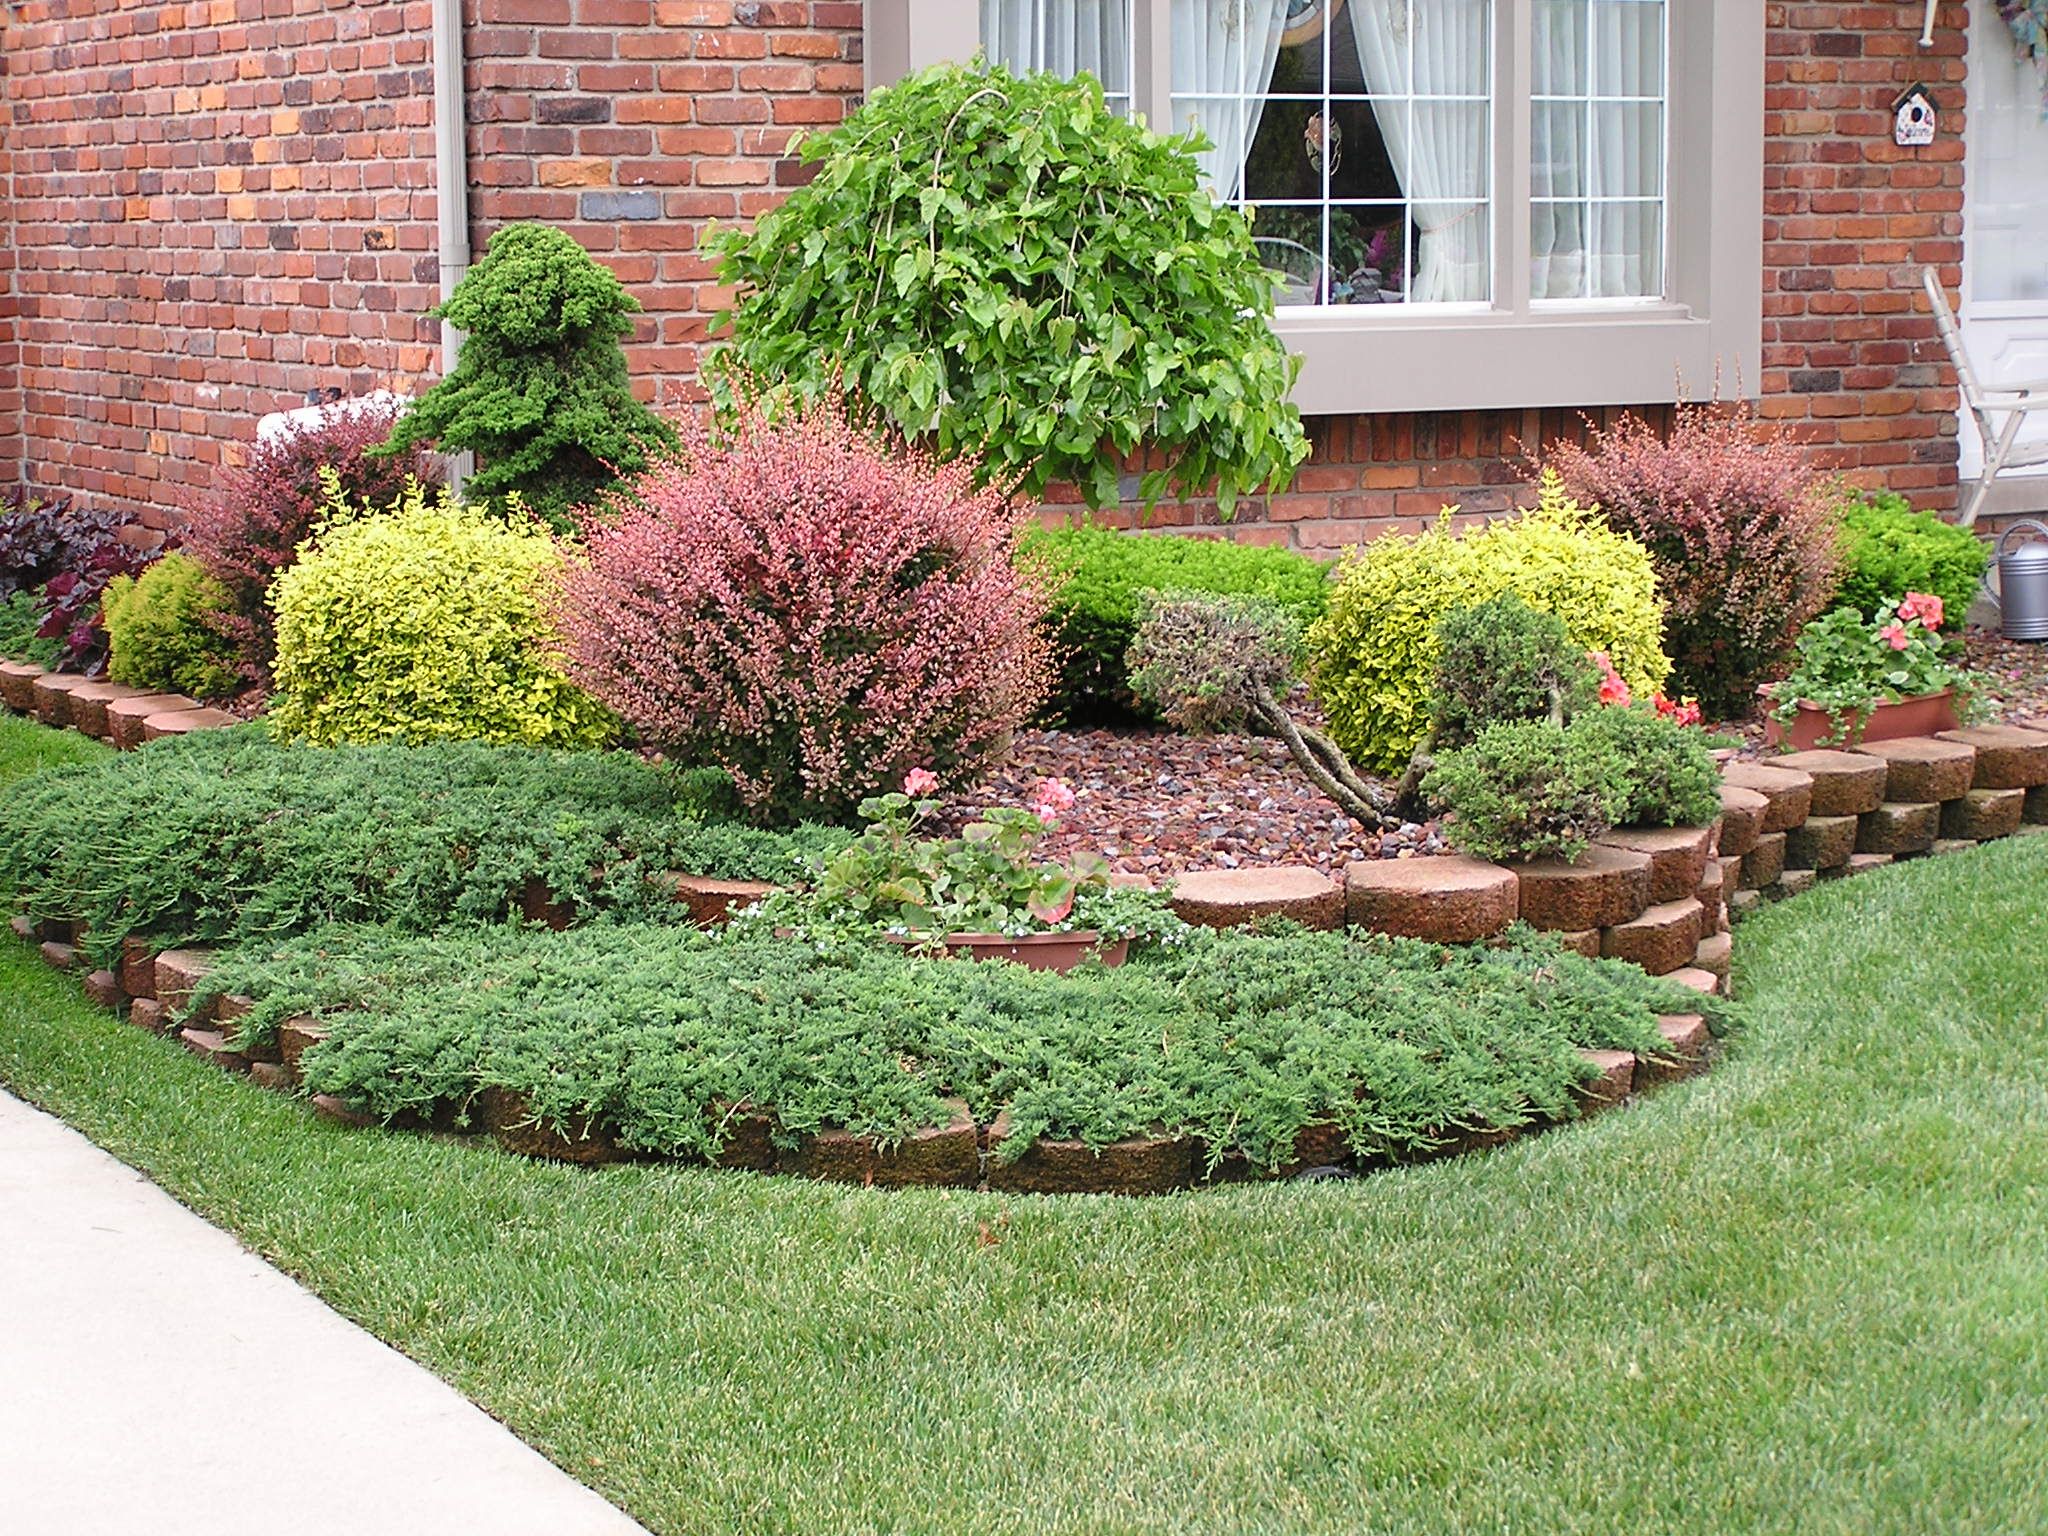 front yard landscaping